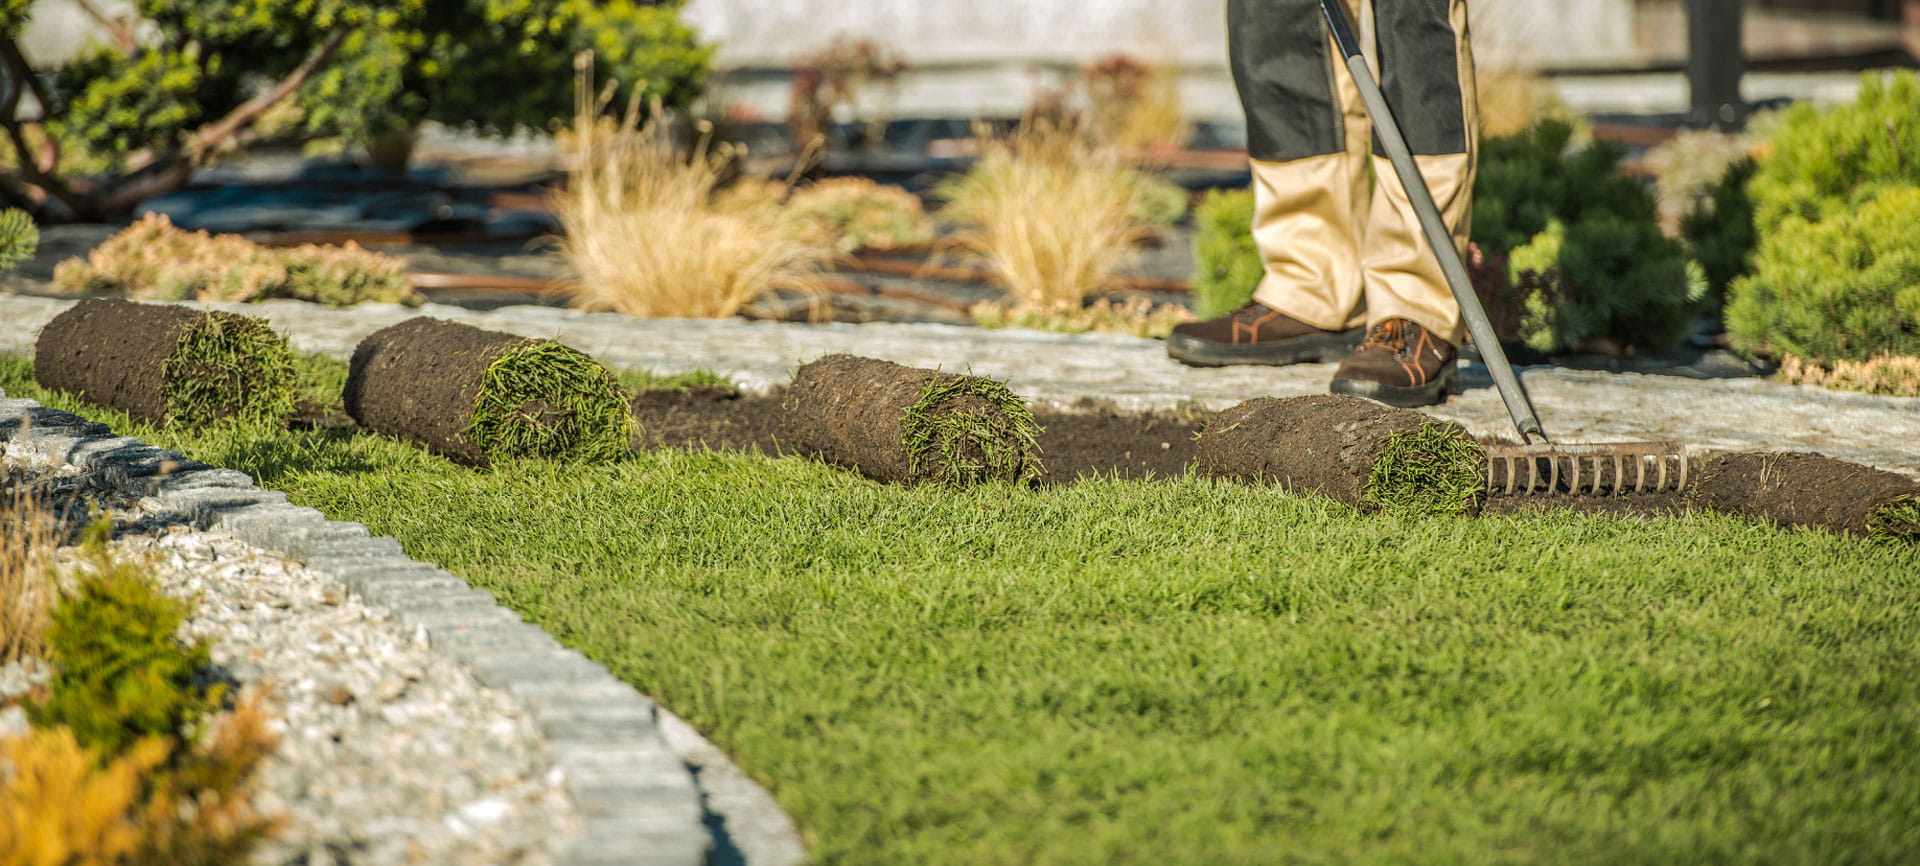 Pet-Friendly Sod: Choosing the Perfect Lawn for Your Furry Friends